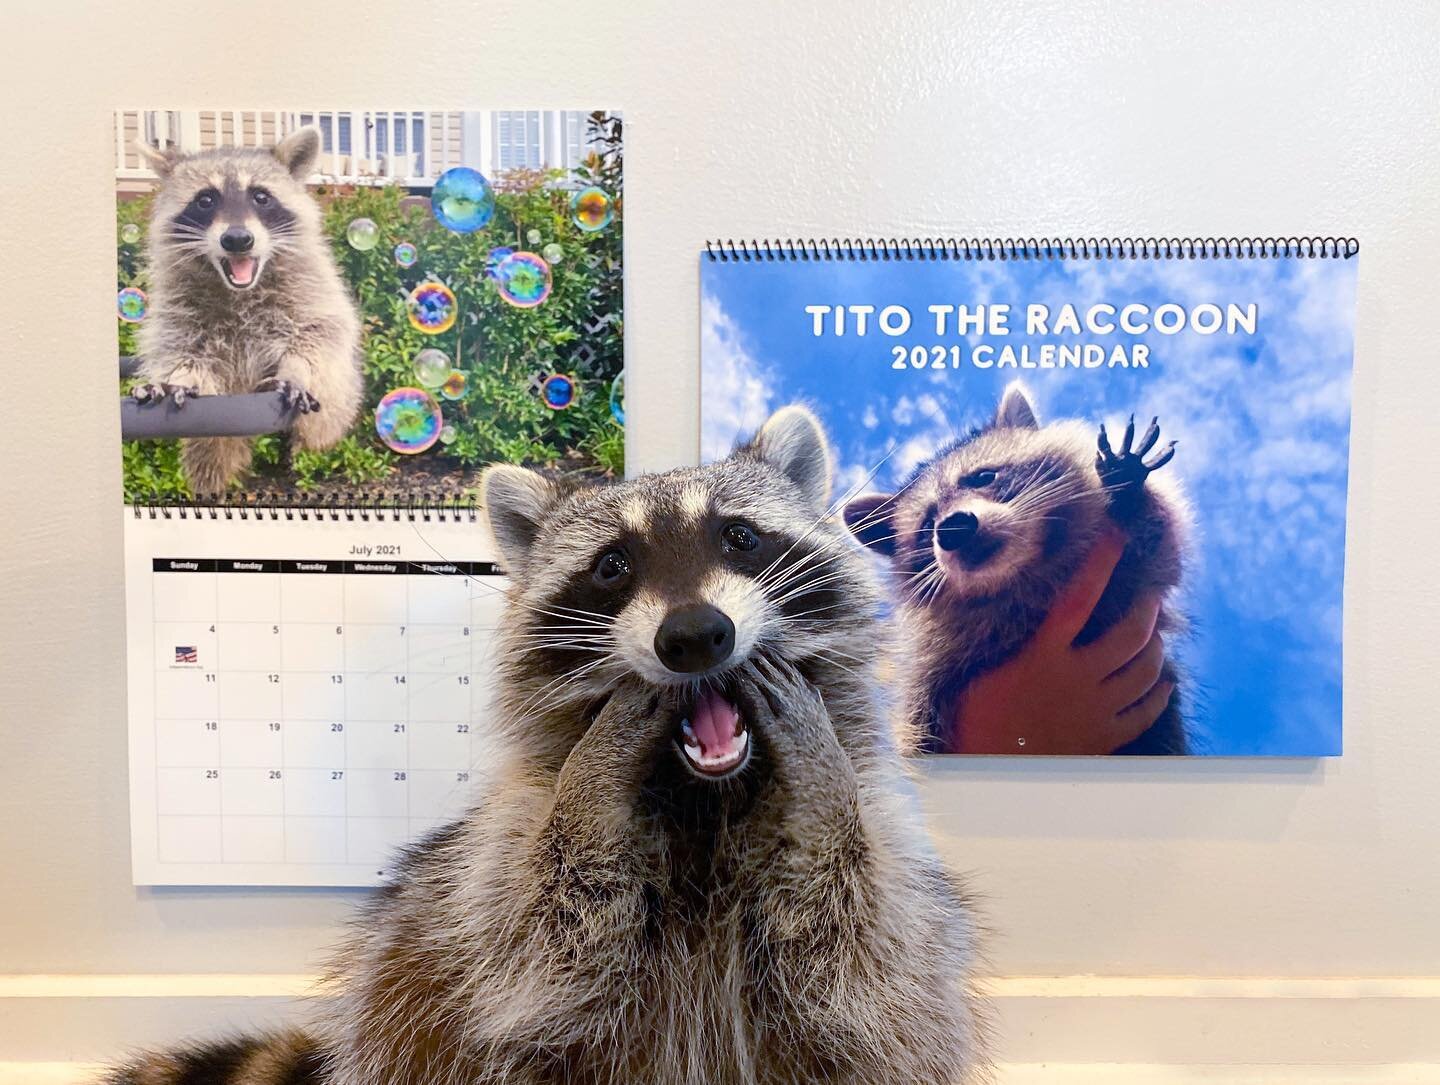 Our first ever calendar is here!! 📆🦝💕 The Tito the Raccoon 2021 Calendar is ready to order from the link in our bio! It has some of your most loved photos from our Insta but also several never before seen pictures. So here is to 2021 and leaving 2